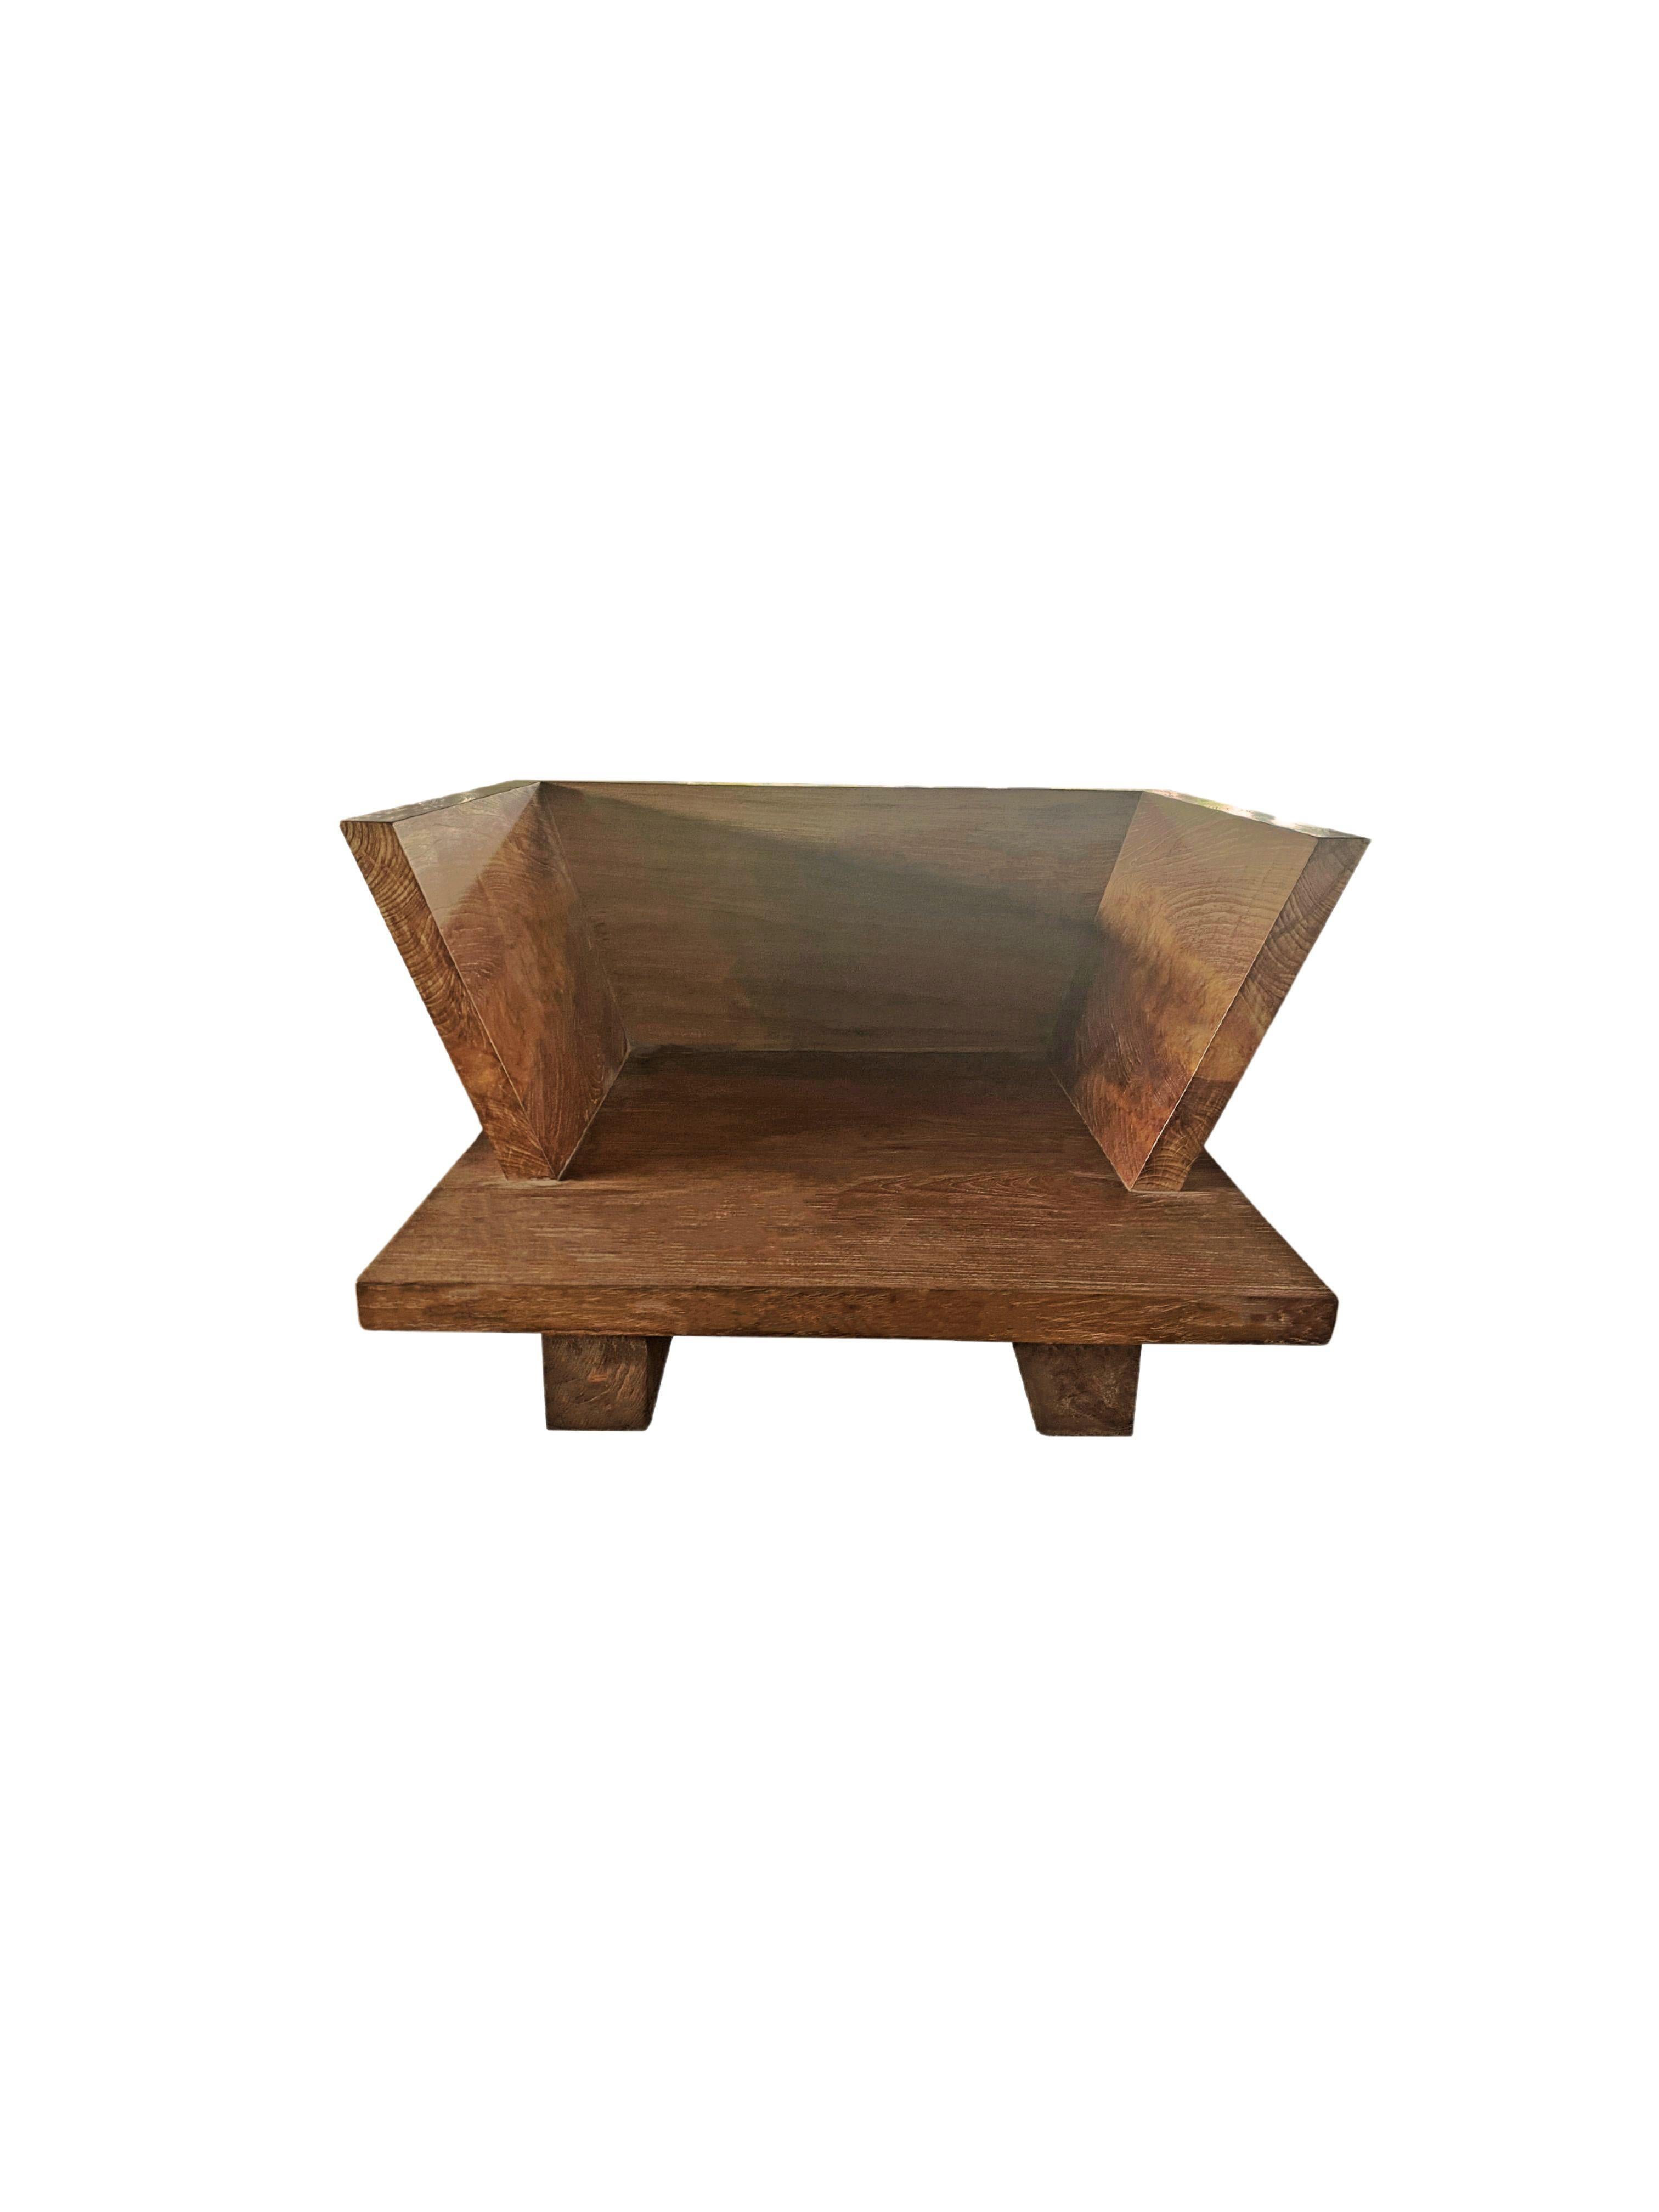 This modern teak wood chair features a large teak wood slab base, backrest and is elevated by two shallow teak wood blocks. This chair is crafted by skilled artisans in Indonesia. This sofa's clear cut shape and minimalist design makes it a suitable